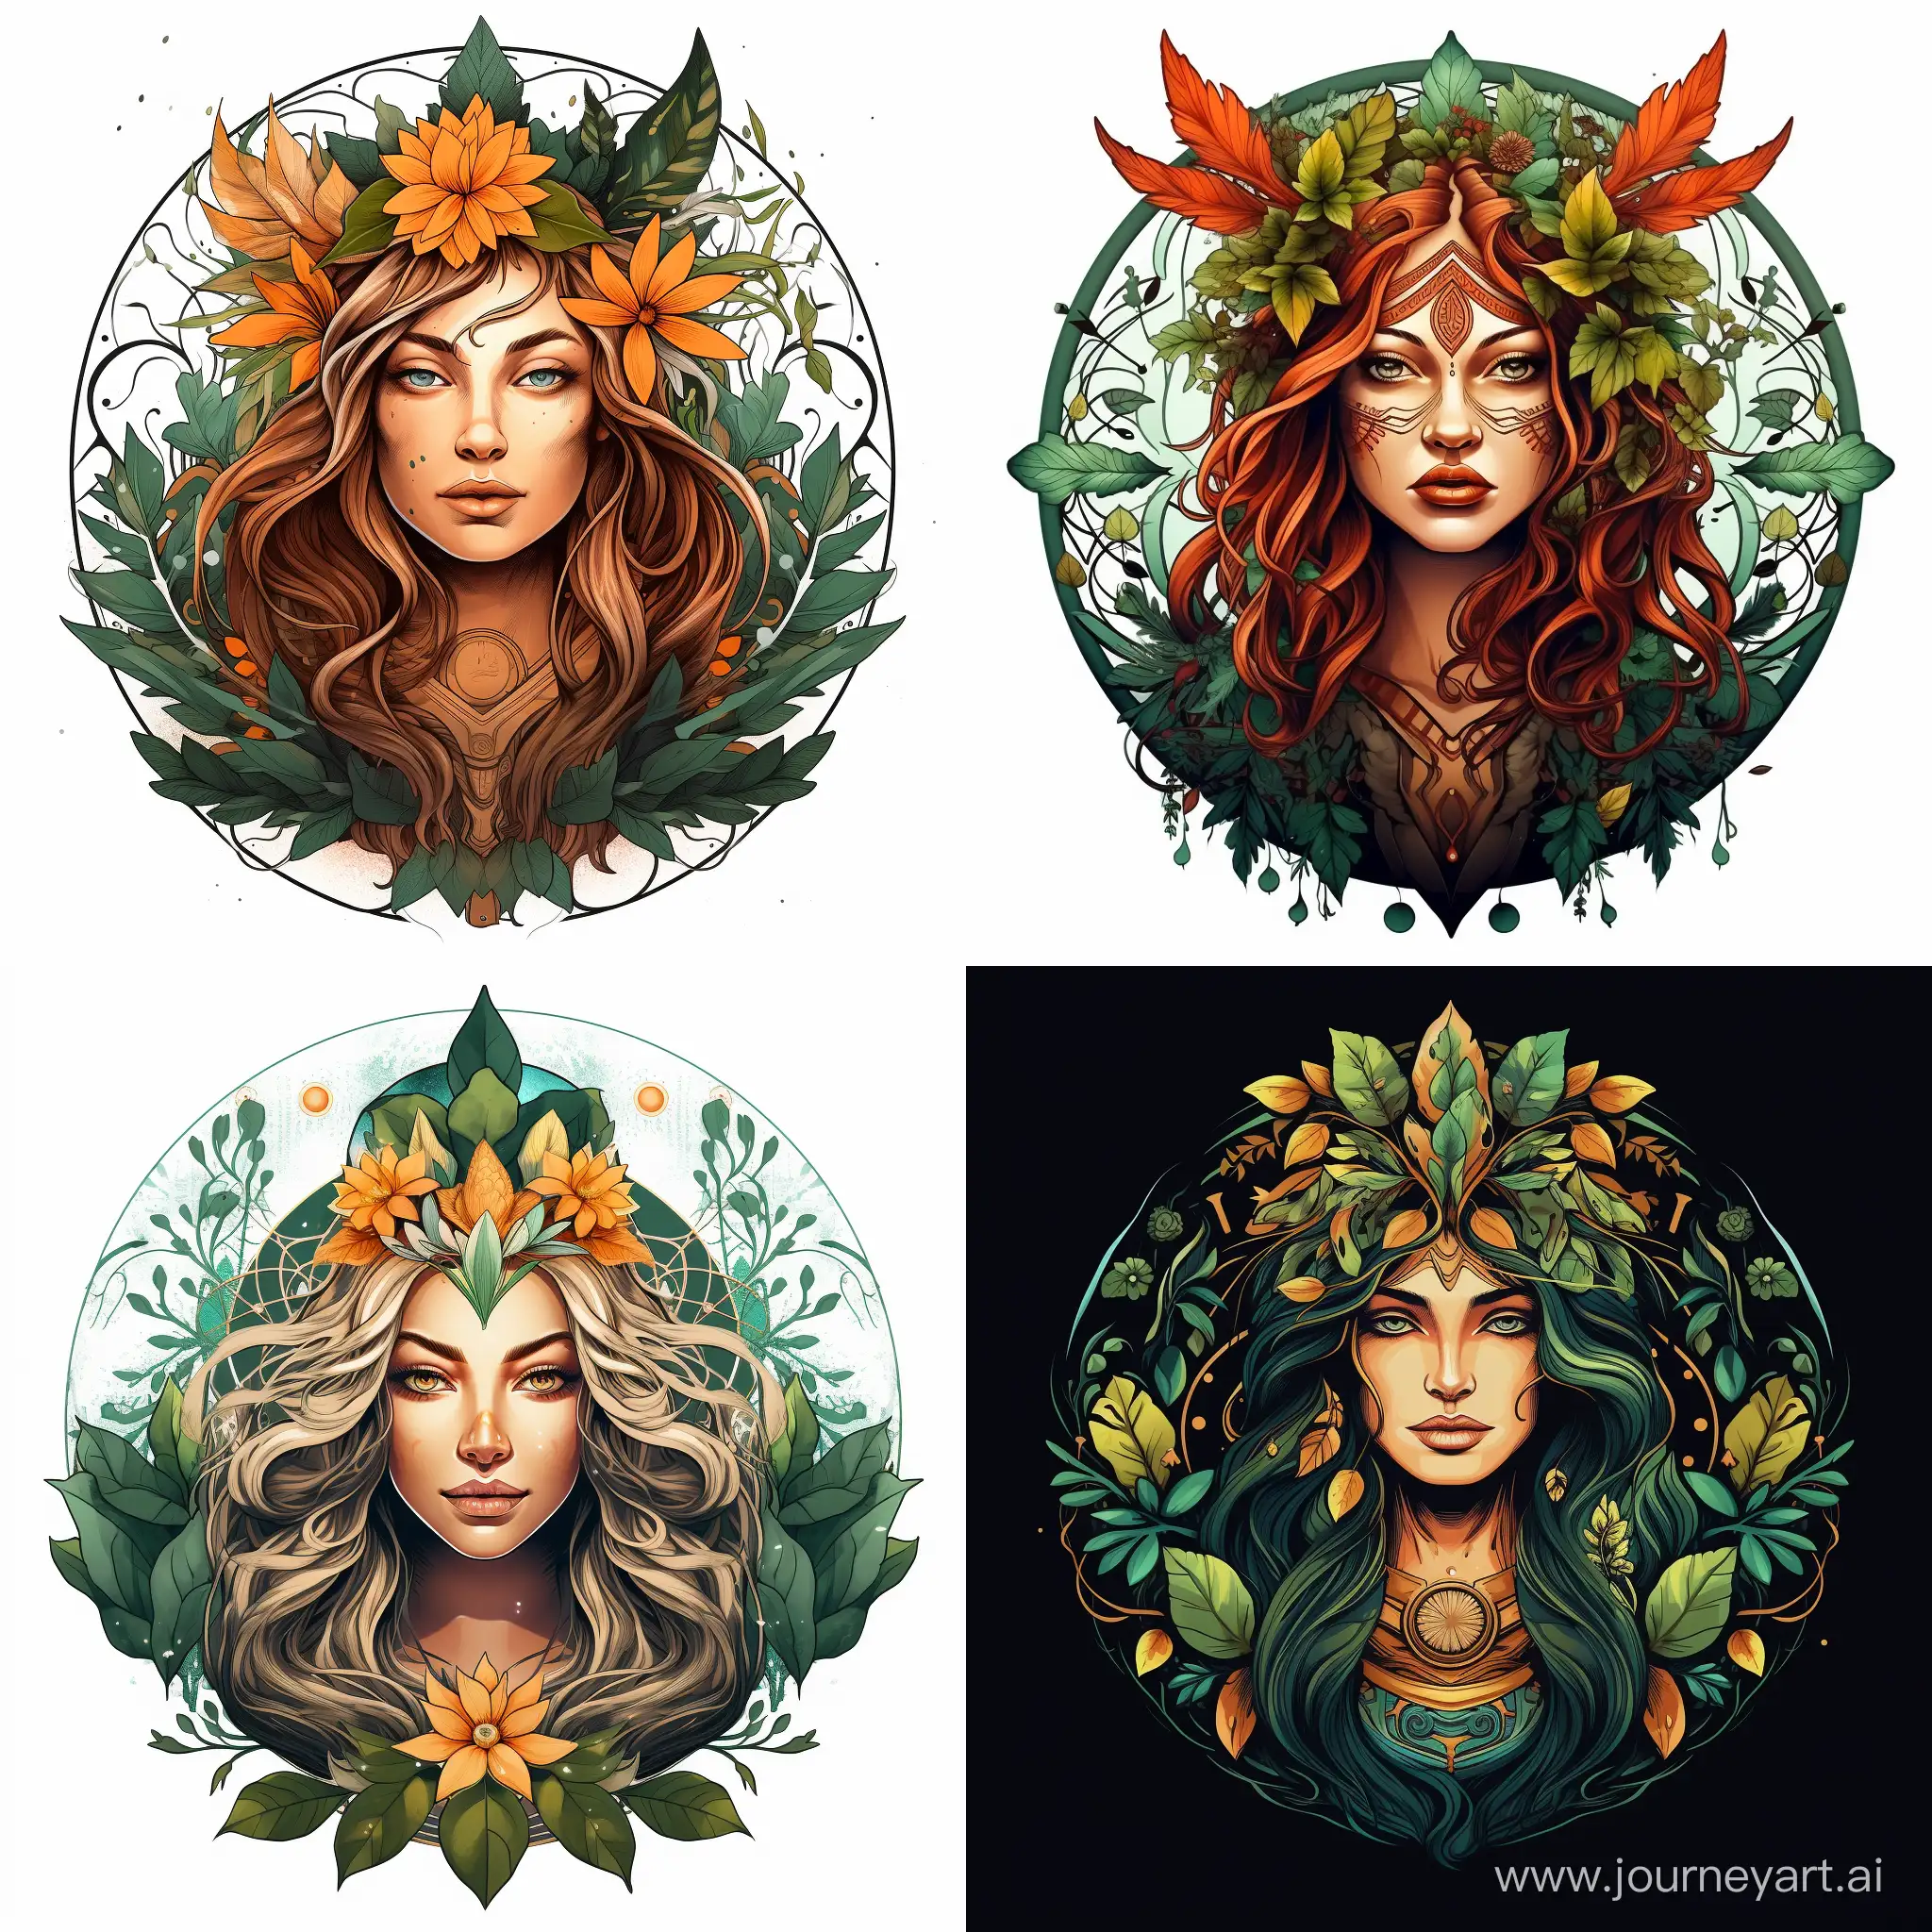 Enchanting-Noble-Druid-Woman-with-Glowing-Eyes-and-Floral-Adornments